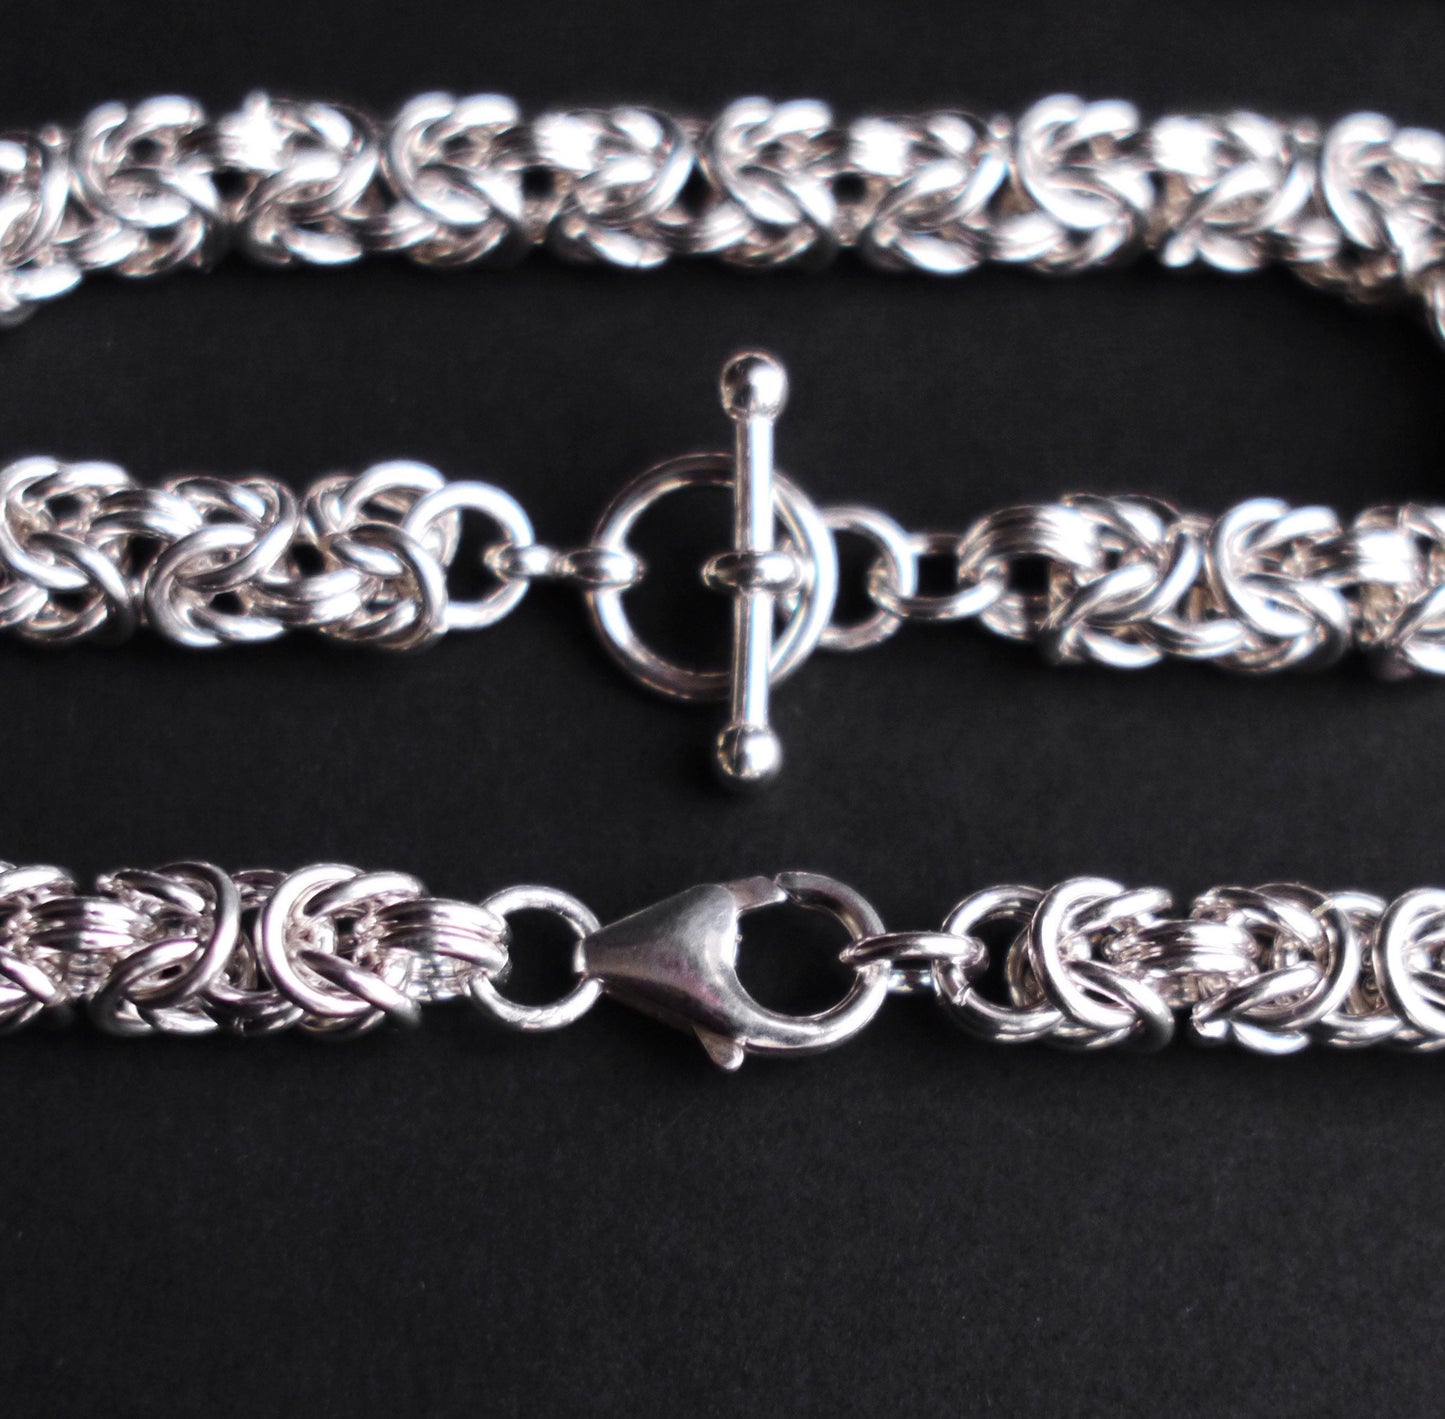 10mm Full Persian Chainmaille Bracelet in Sterling Sliver